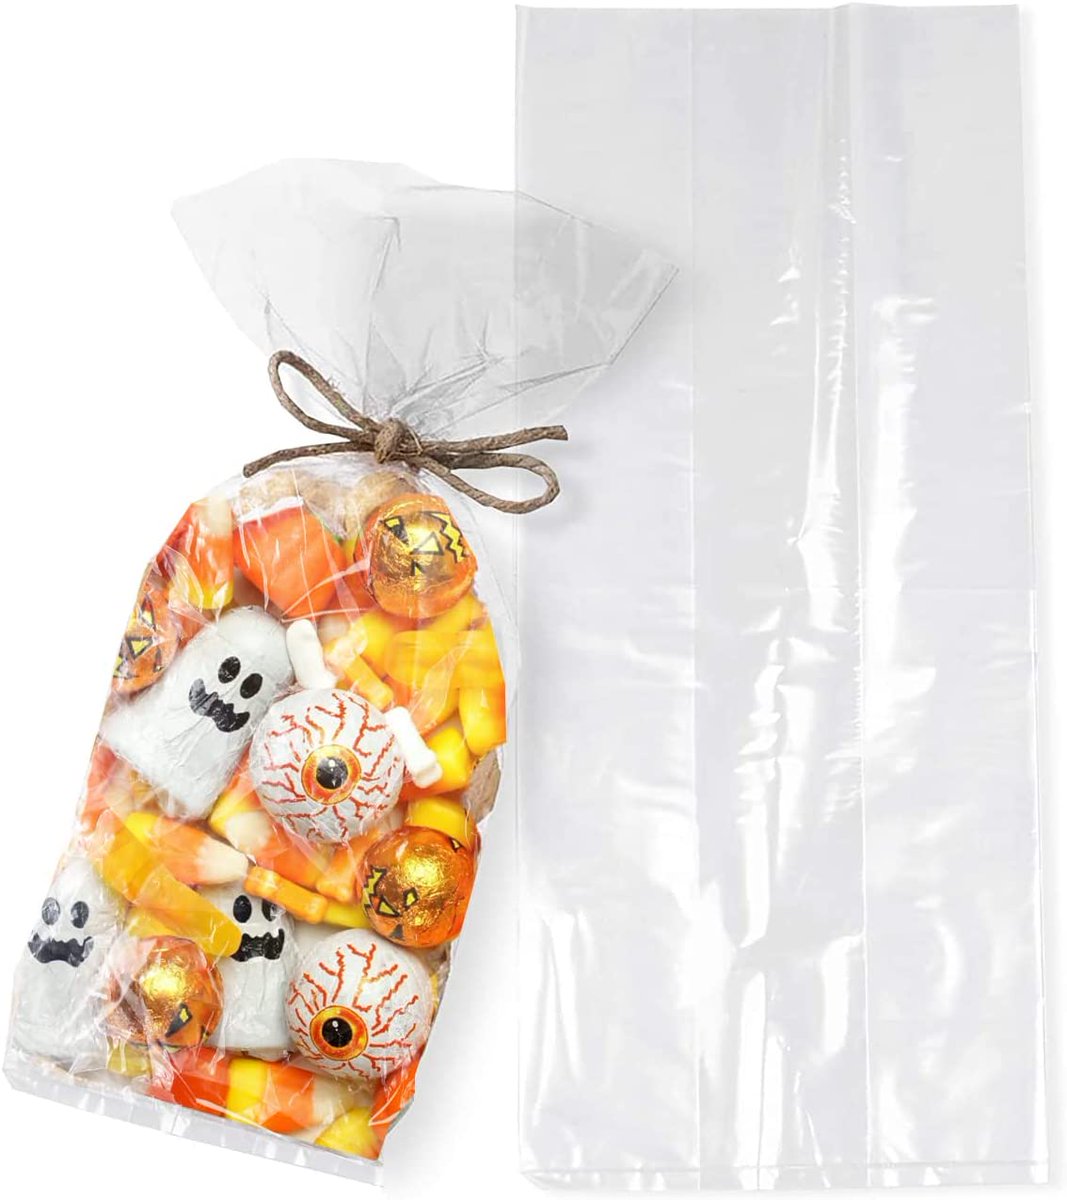 Our #Cookiebags are made from 100% virgin low-density polyethylene, safe for food contact. #Sidegussets expand to accommodate large or irregular-sized items. 
#Clearpolybags are resistant to impact, tear, and moisture. 
Great for storing a variety of baked goods.